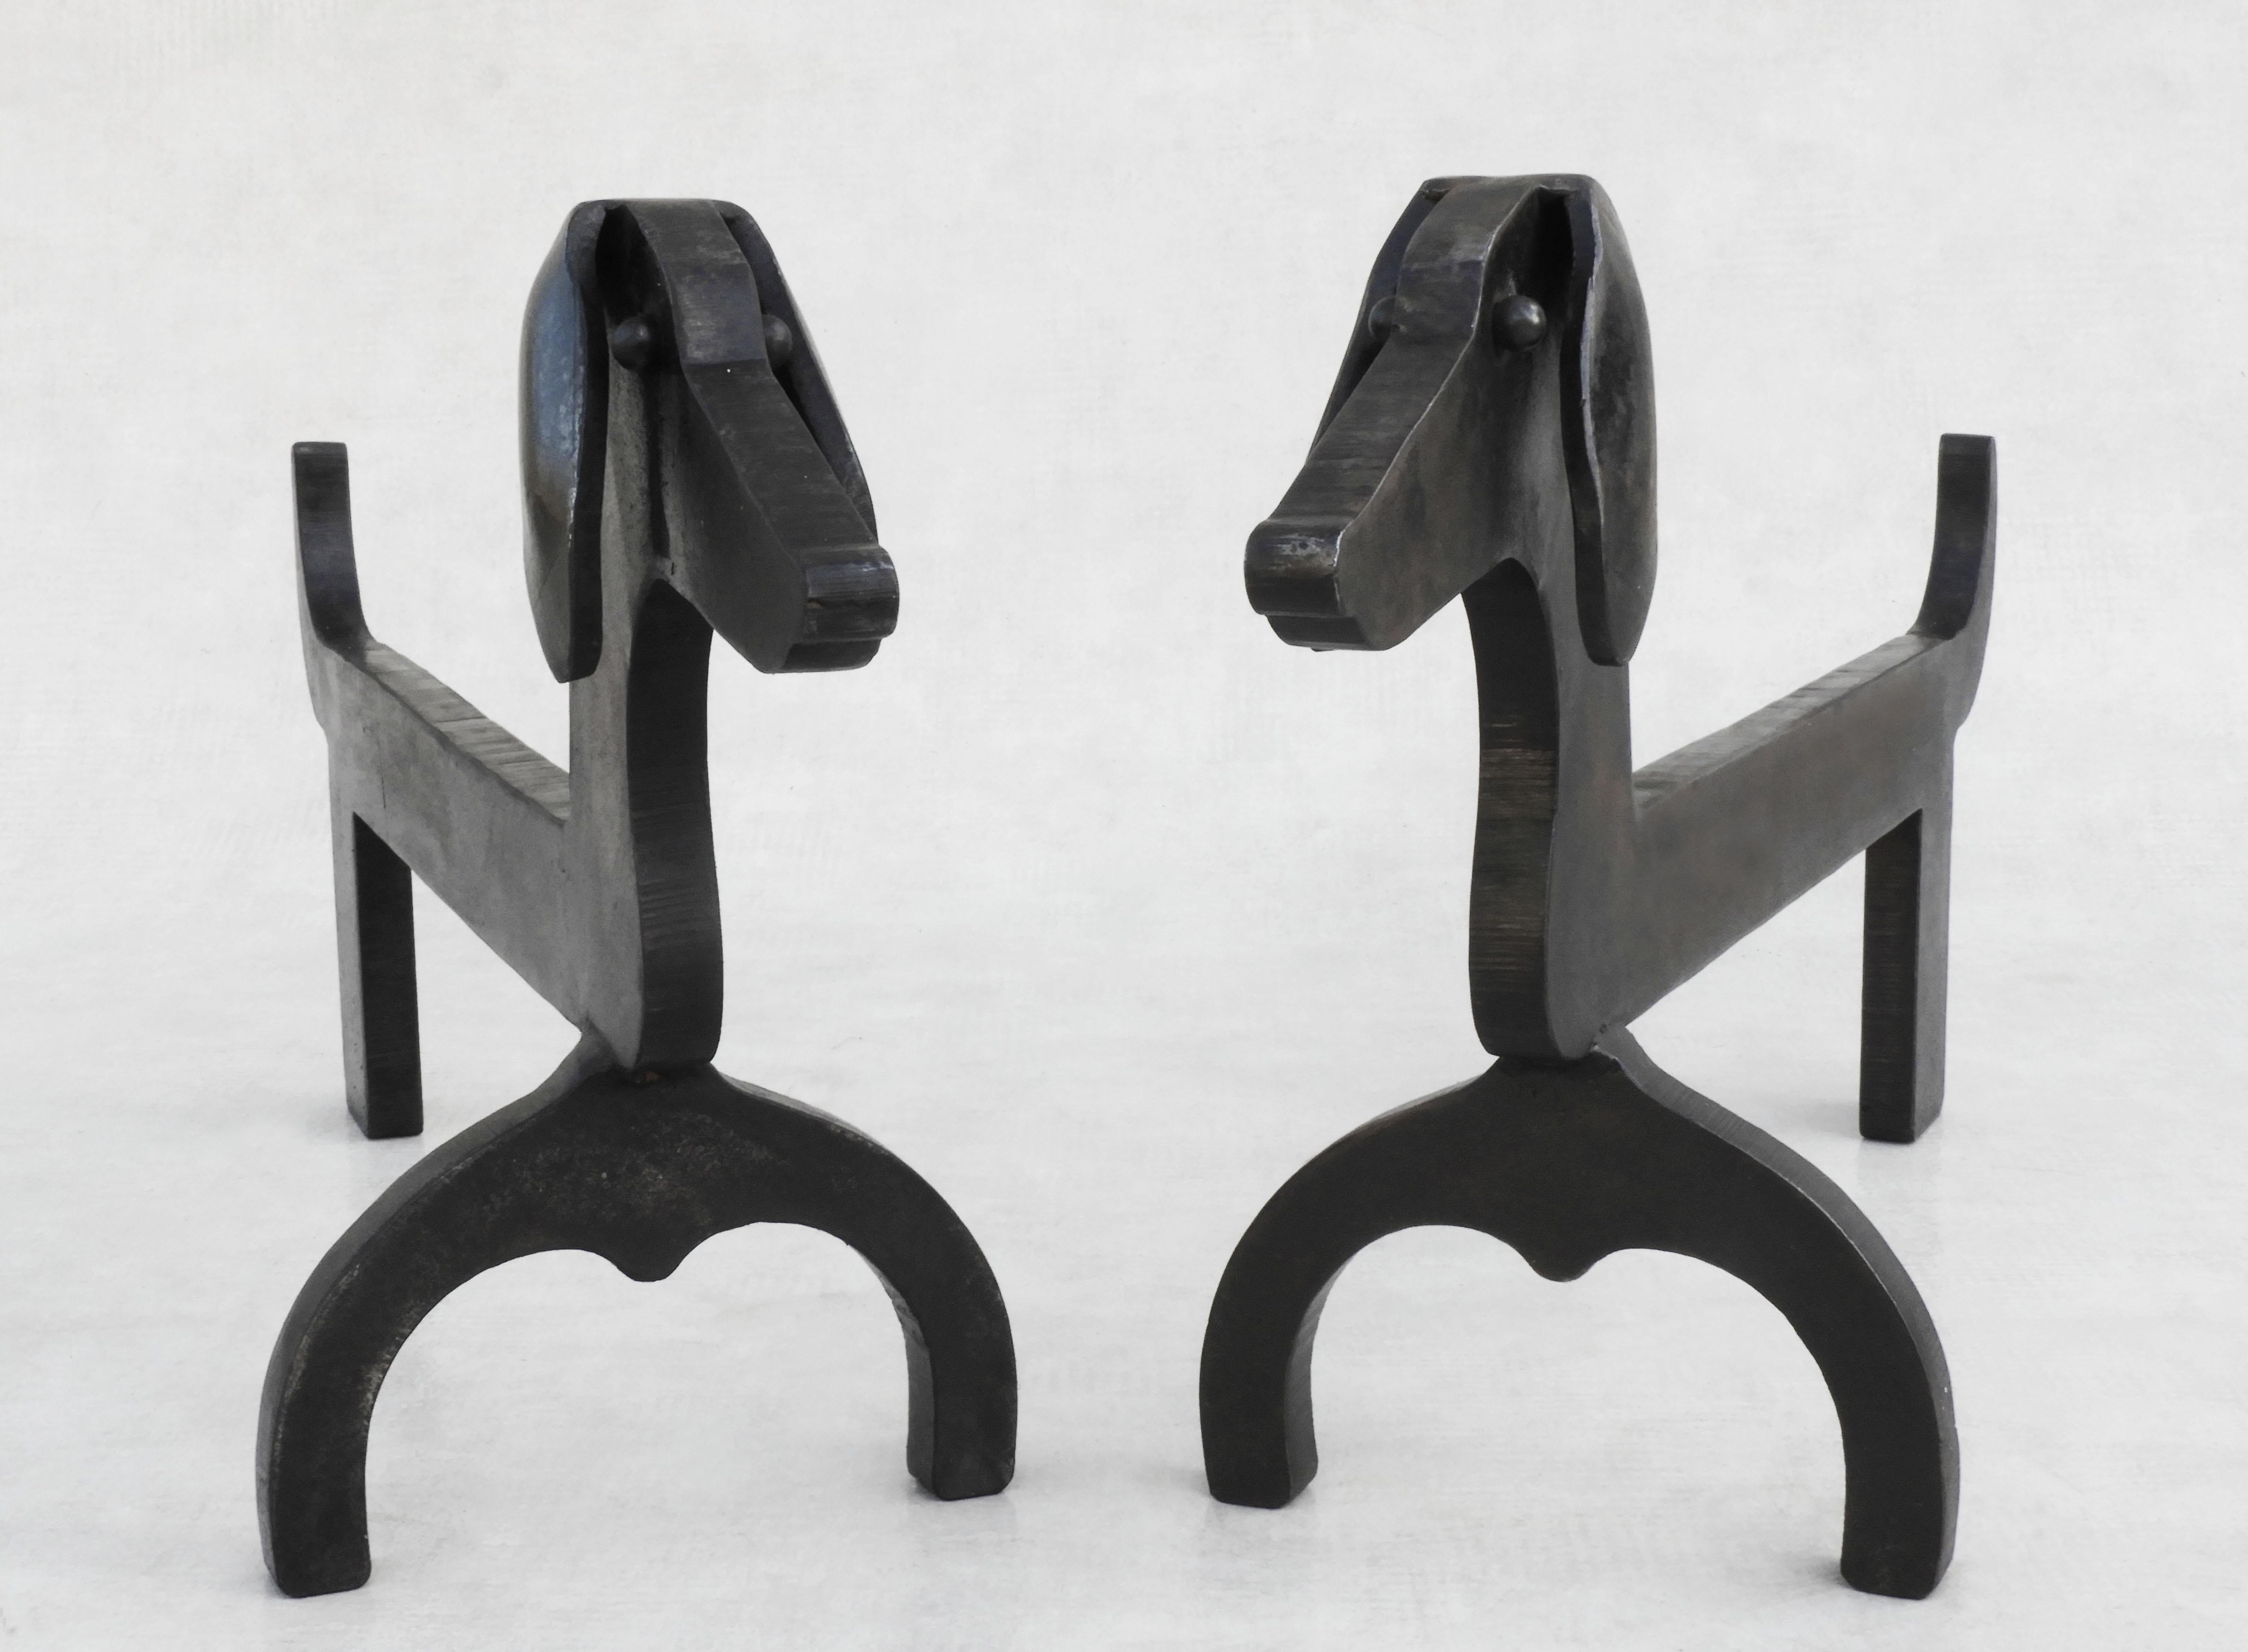 Great pair of Dachshund andirons in the style of Edouard Schenck.

A charming duo of Iron 'fire dogs' in very good vintage condition with great patina.

Dimensions:  H29cm/11.41in L59cm/23.22in D16.5cm/6.5in W6kg/13.22lbs each

Priced per pair.